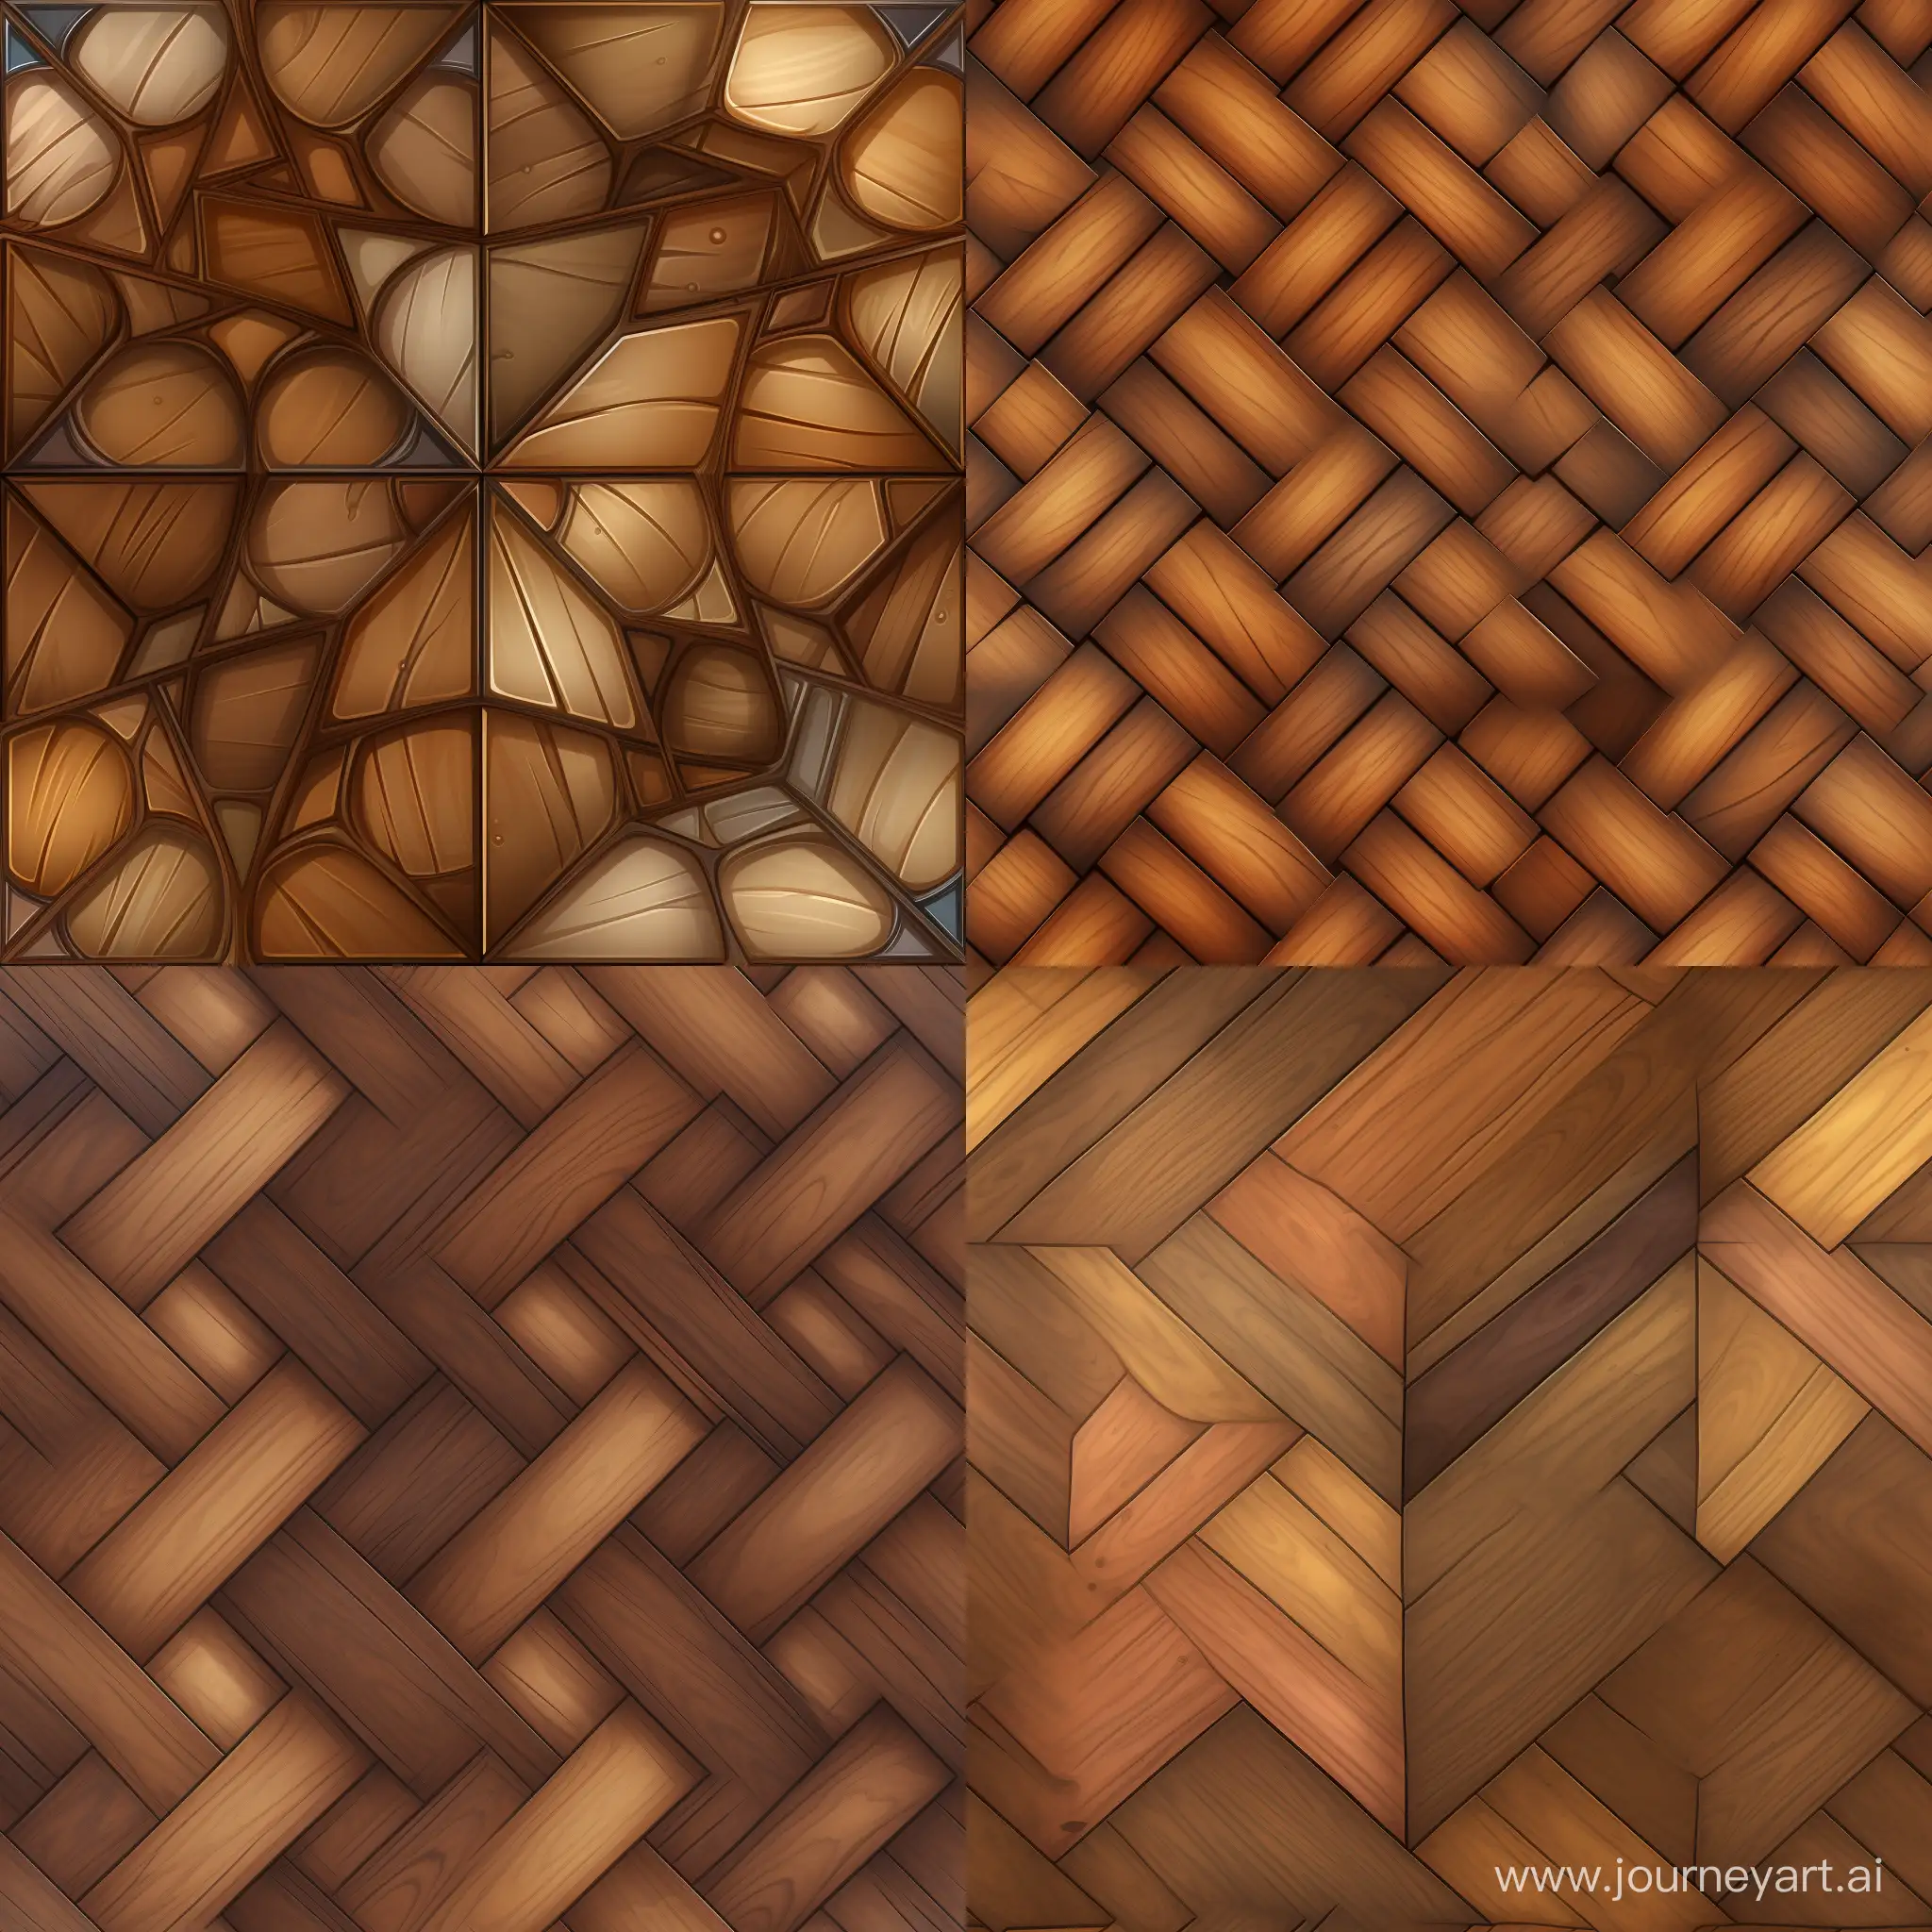 Stylized-Wooden-Flooring-Texture-HighQuality-Cell-Shaded-Art